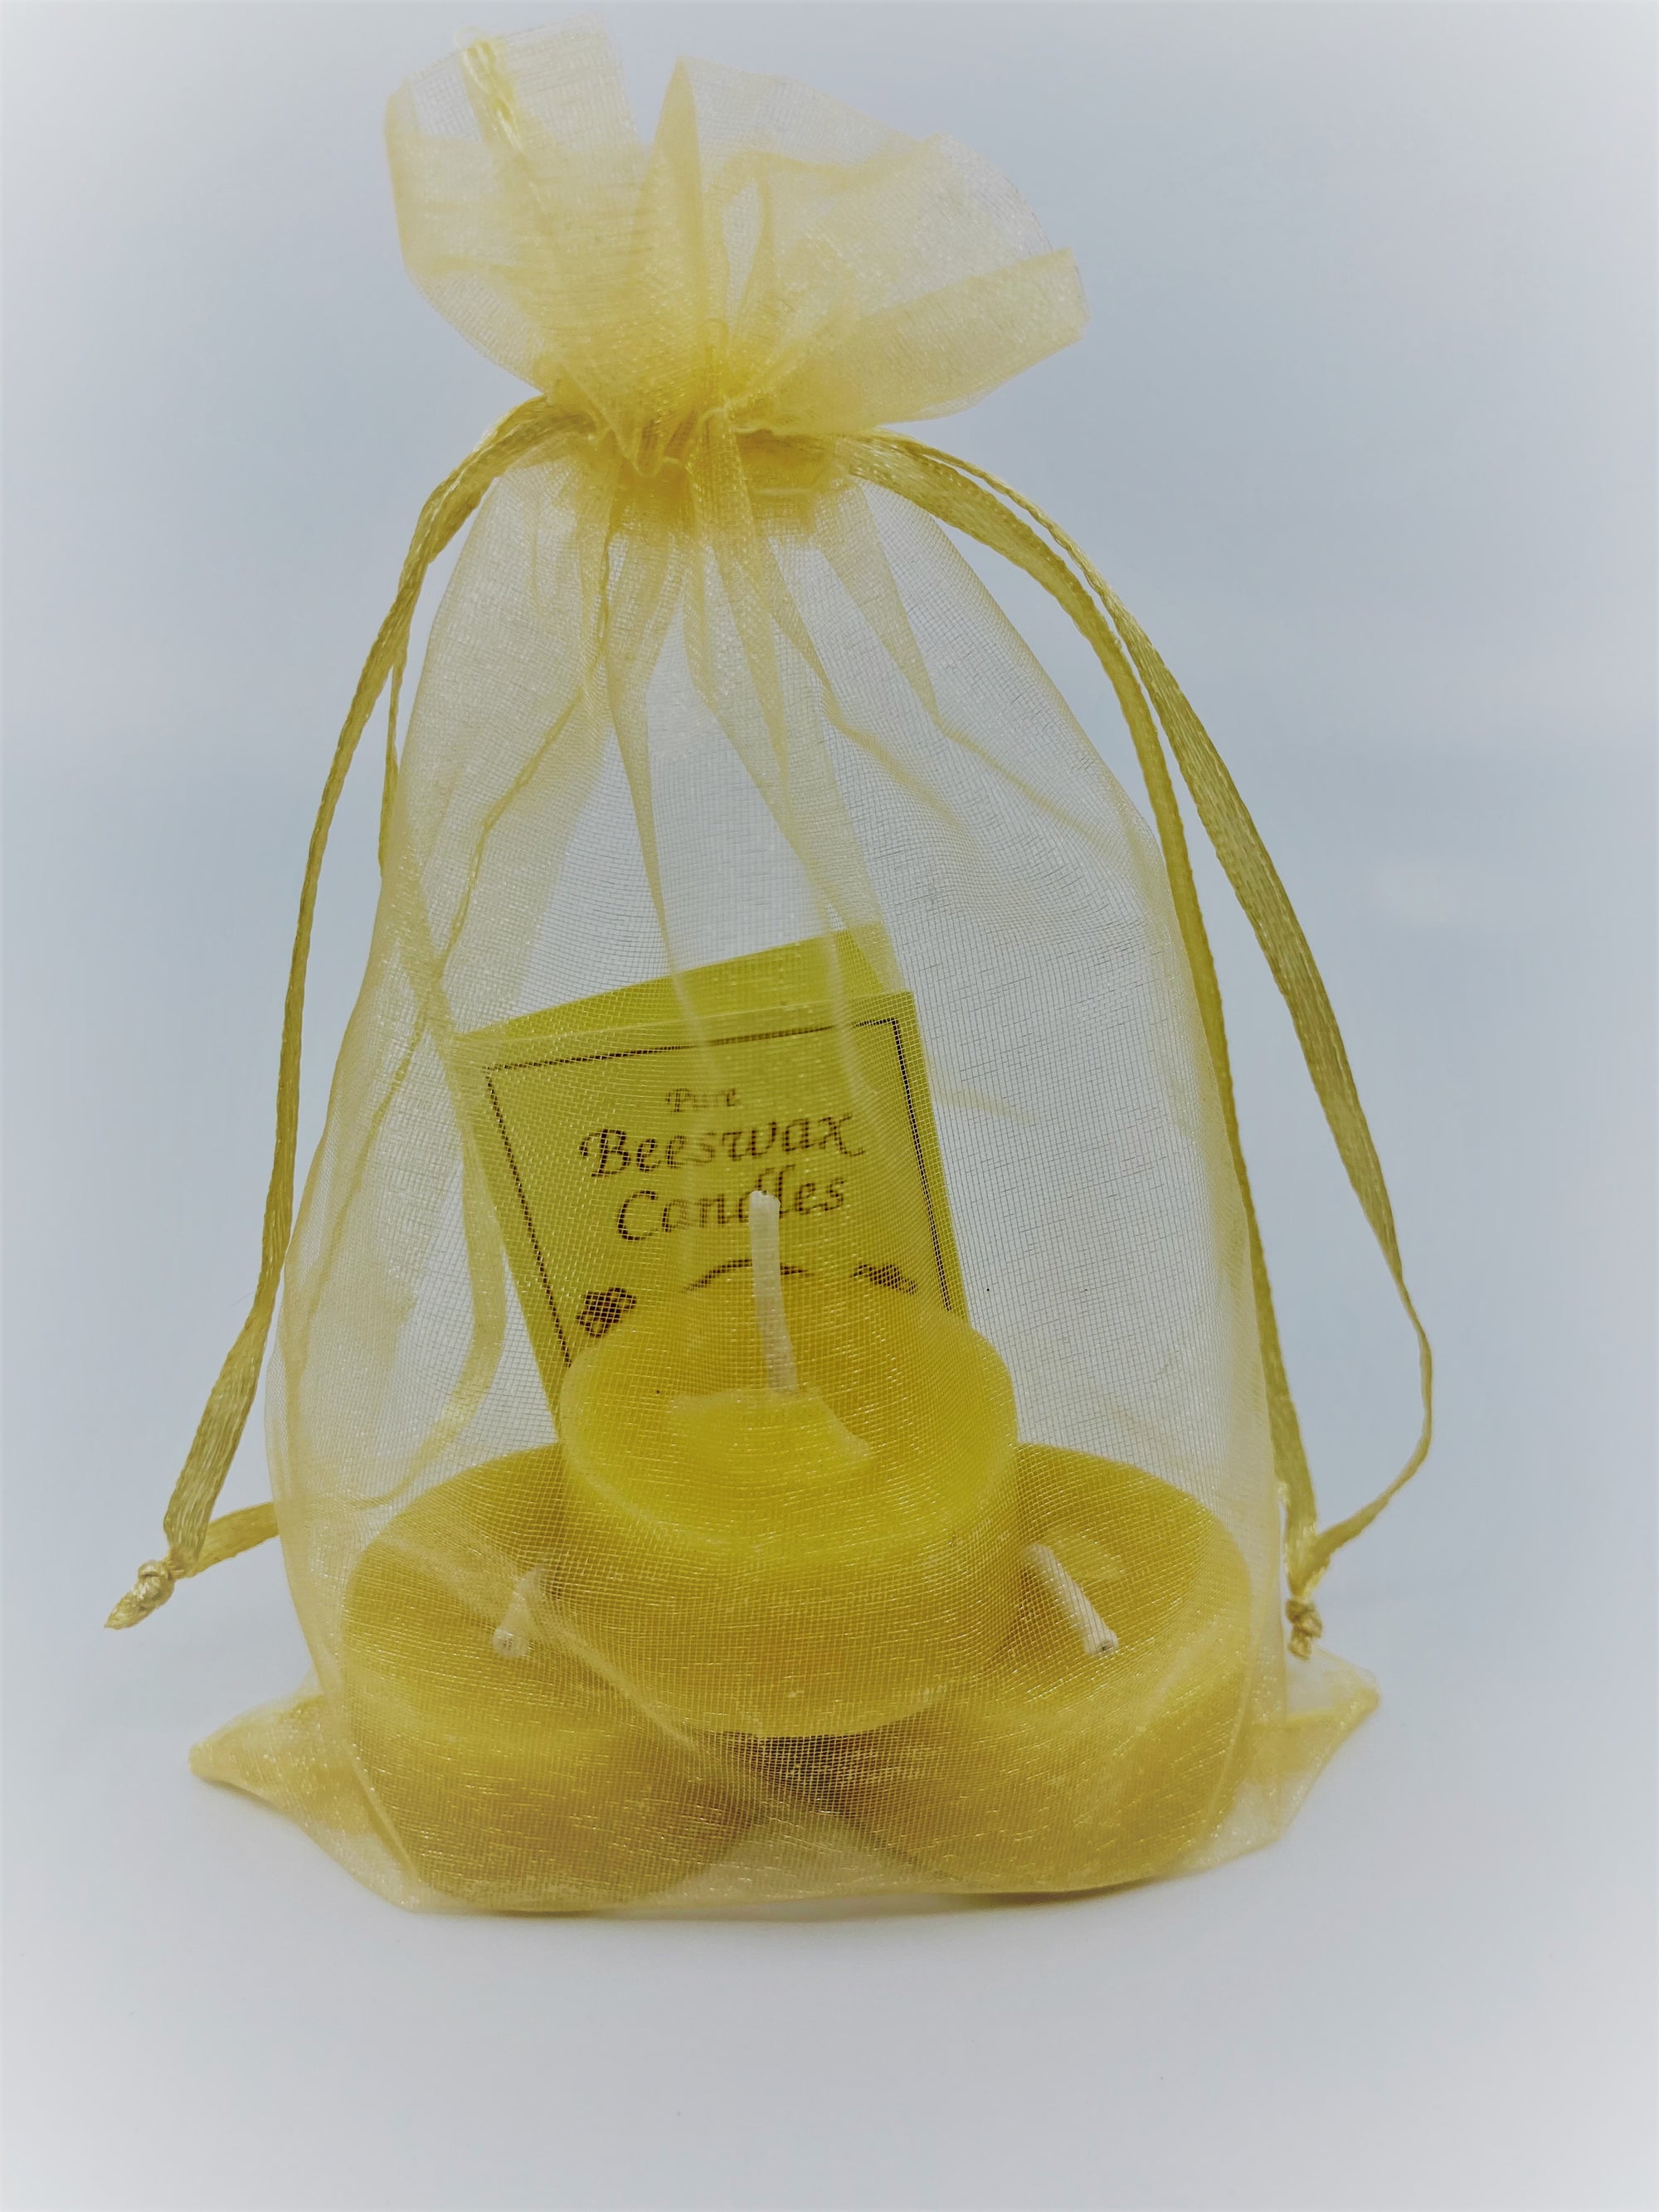 This set contains 3 tea lights made from 100% beeswax and will burn approximately 3-4 hours each.  Please note that since beeswax is a natural resource that colors will range from pale yellow to deep gold.